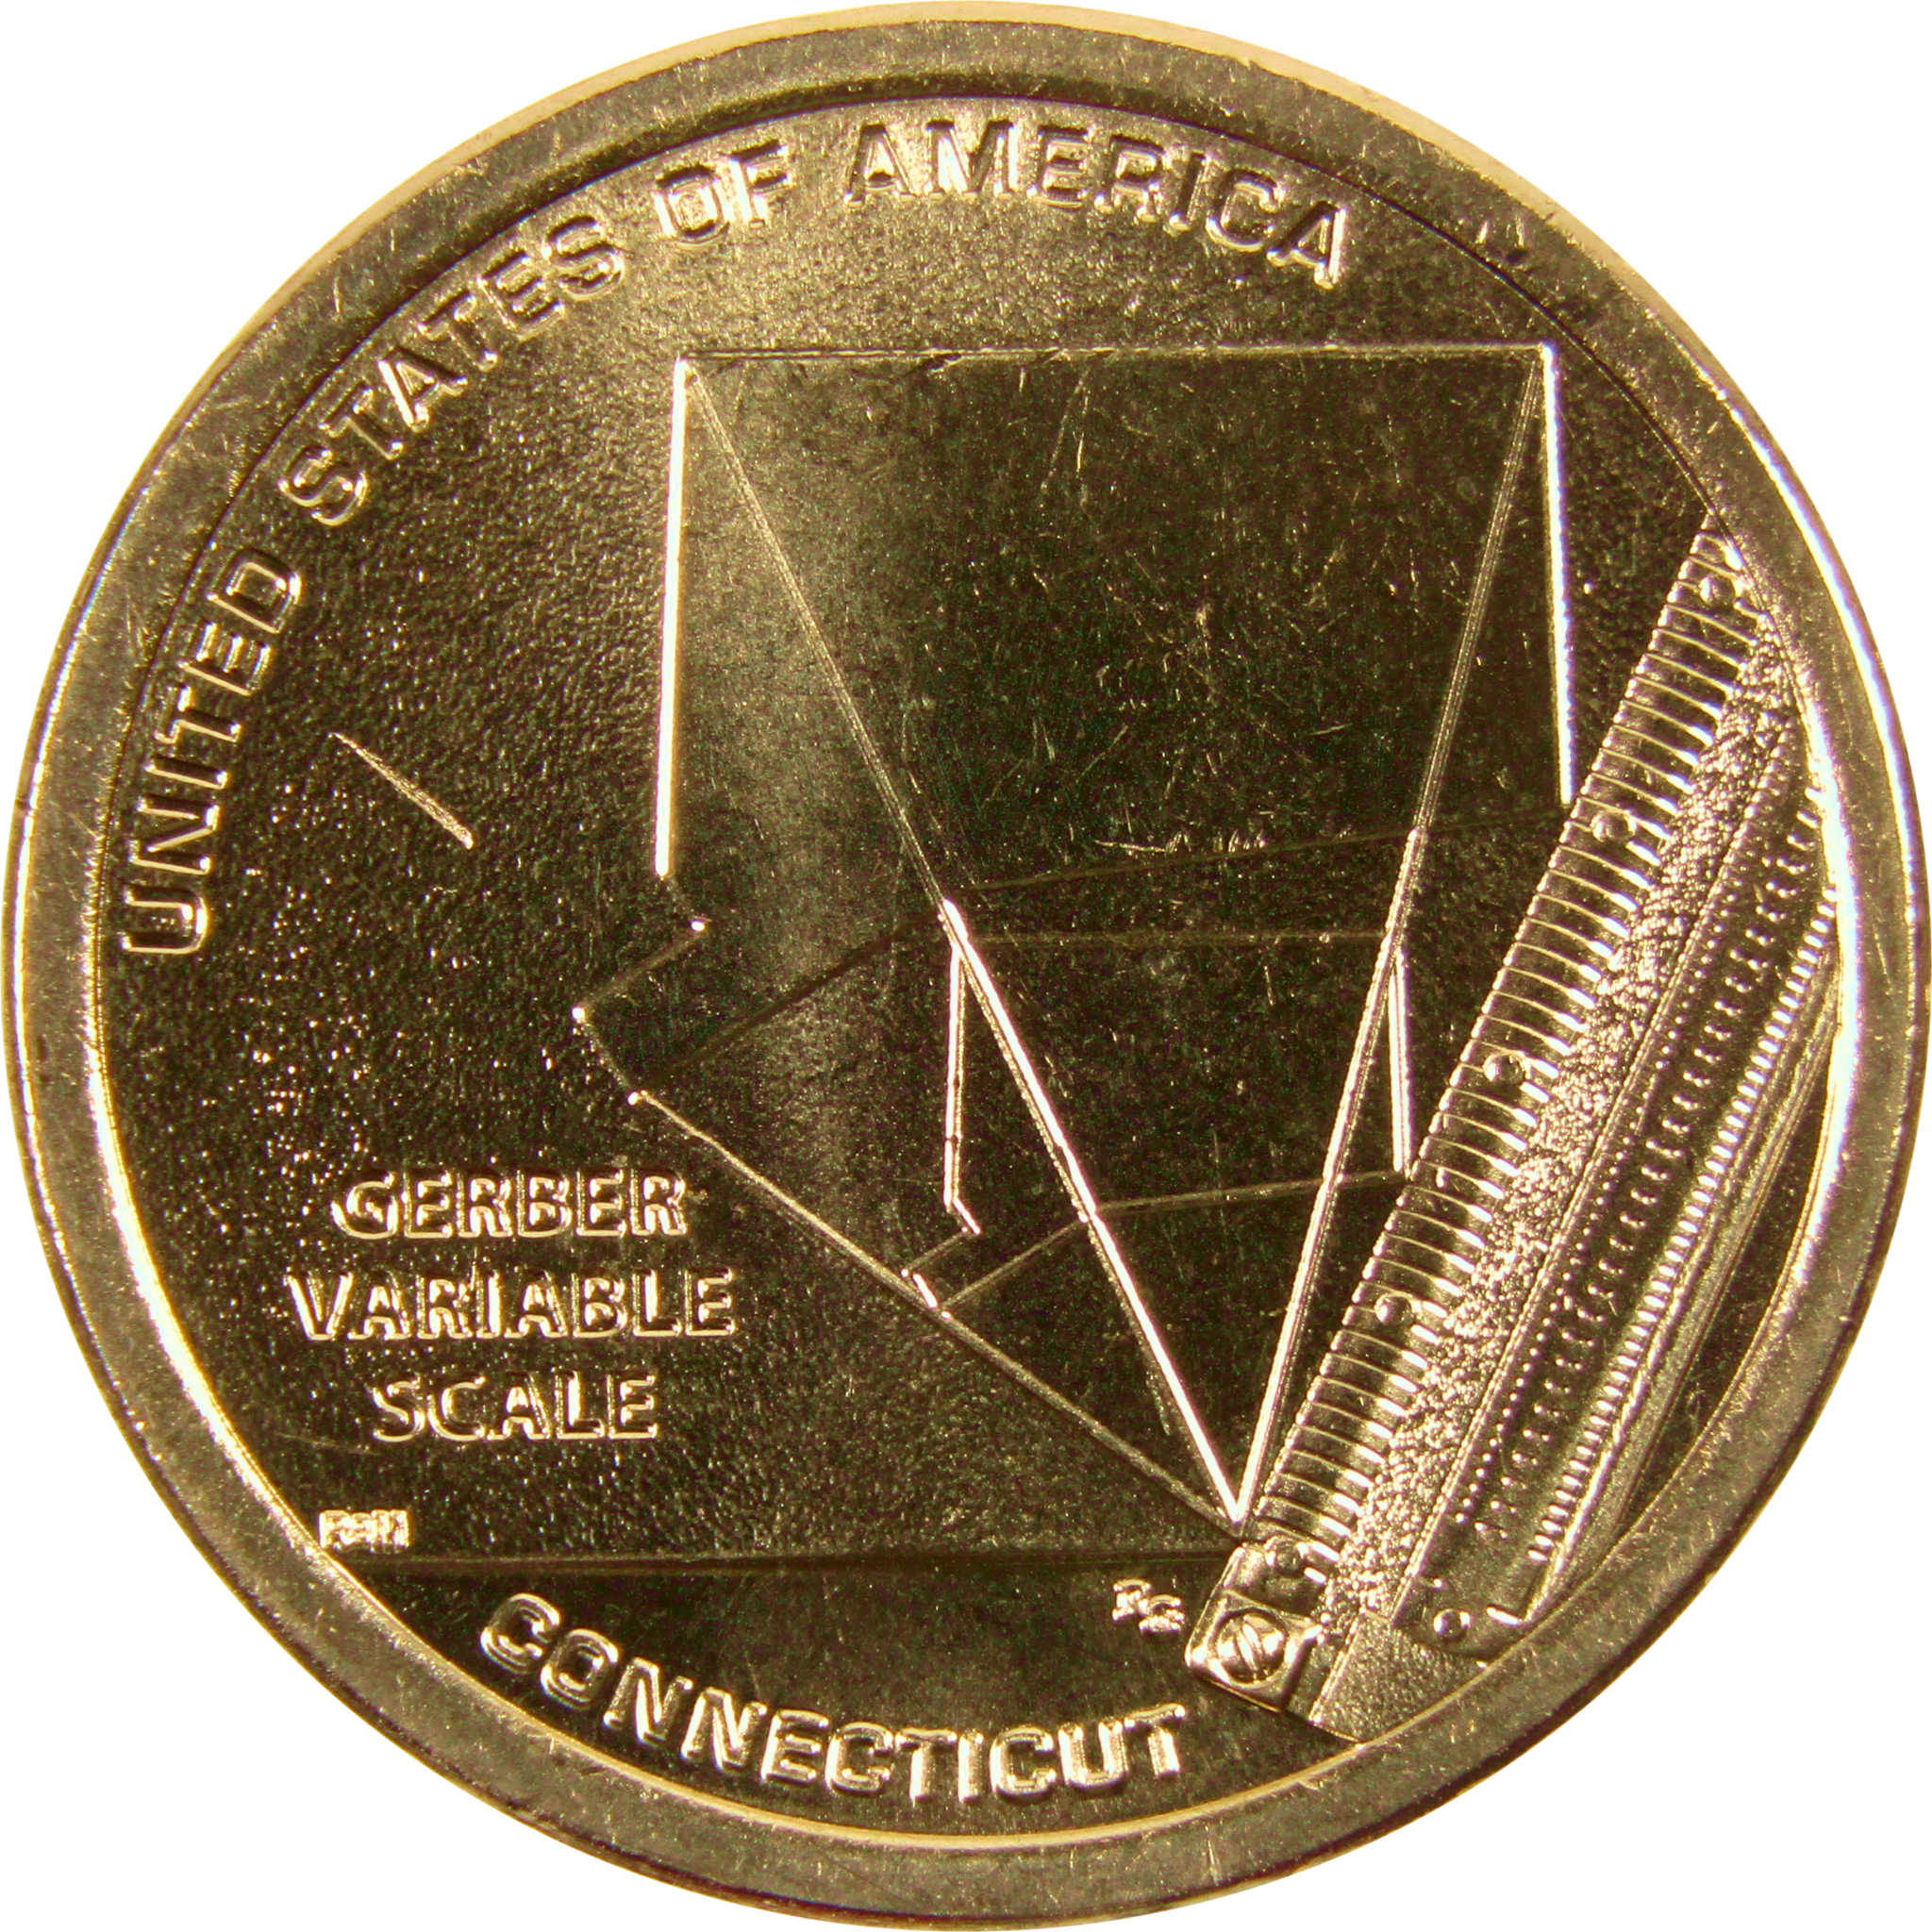 2020 D Gerber Variable Scale American Innovation Dollar Uncirculated